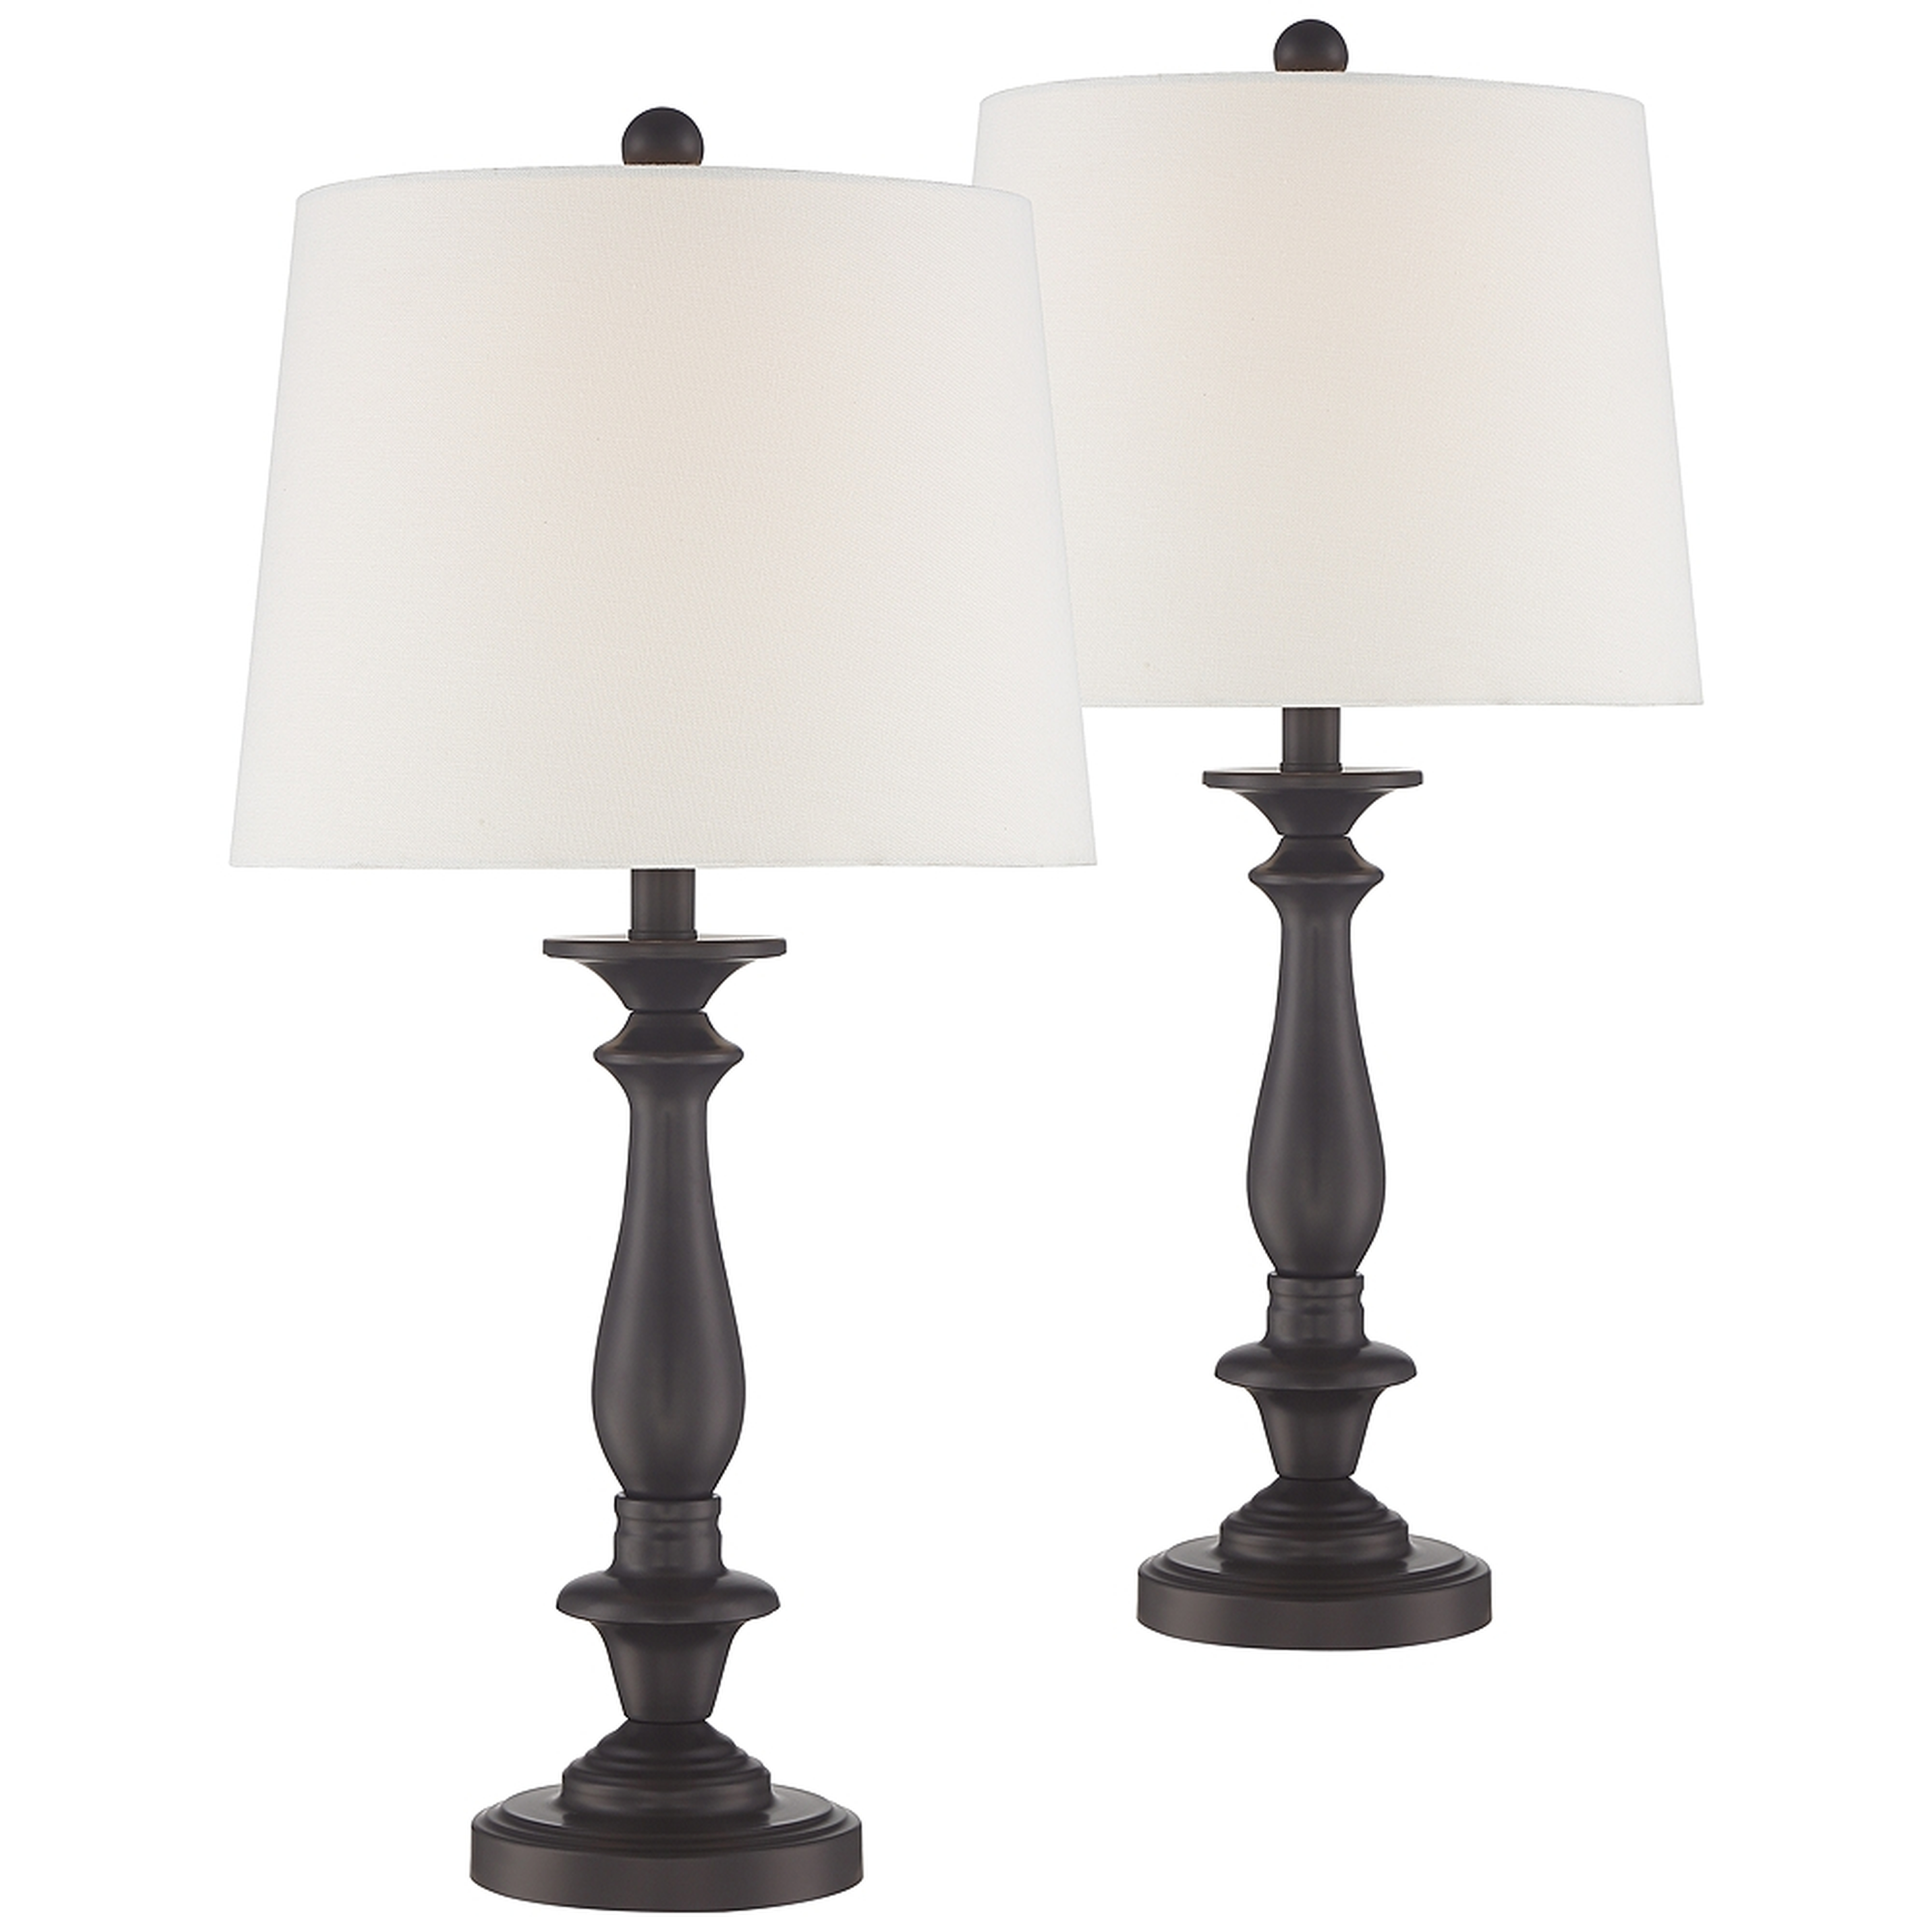 Percy Bronze Metal Table Lamps Set of 2 - Style # 85V95 - Lamps Plus